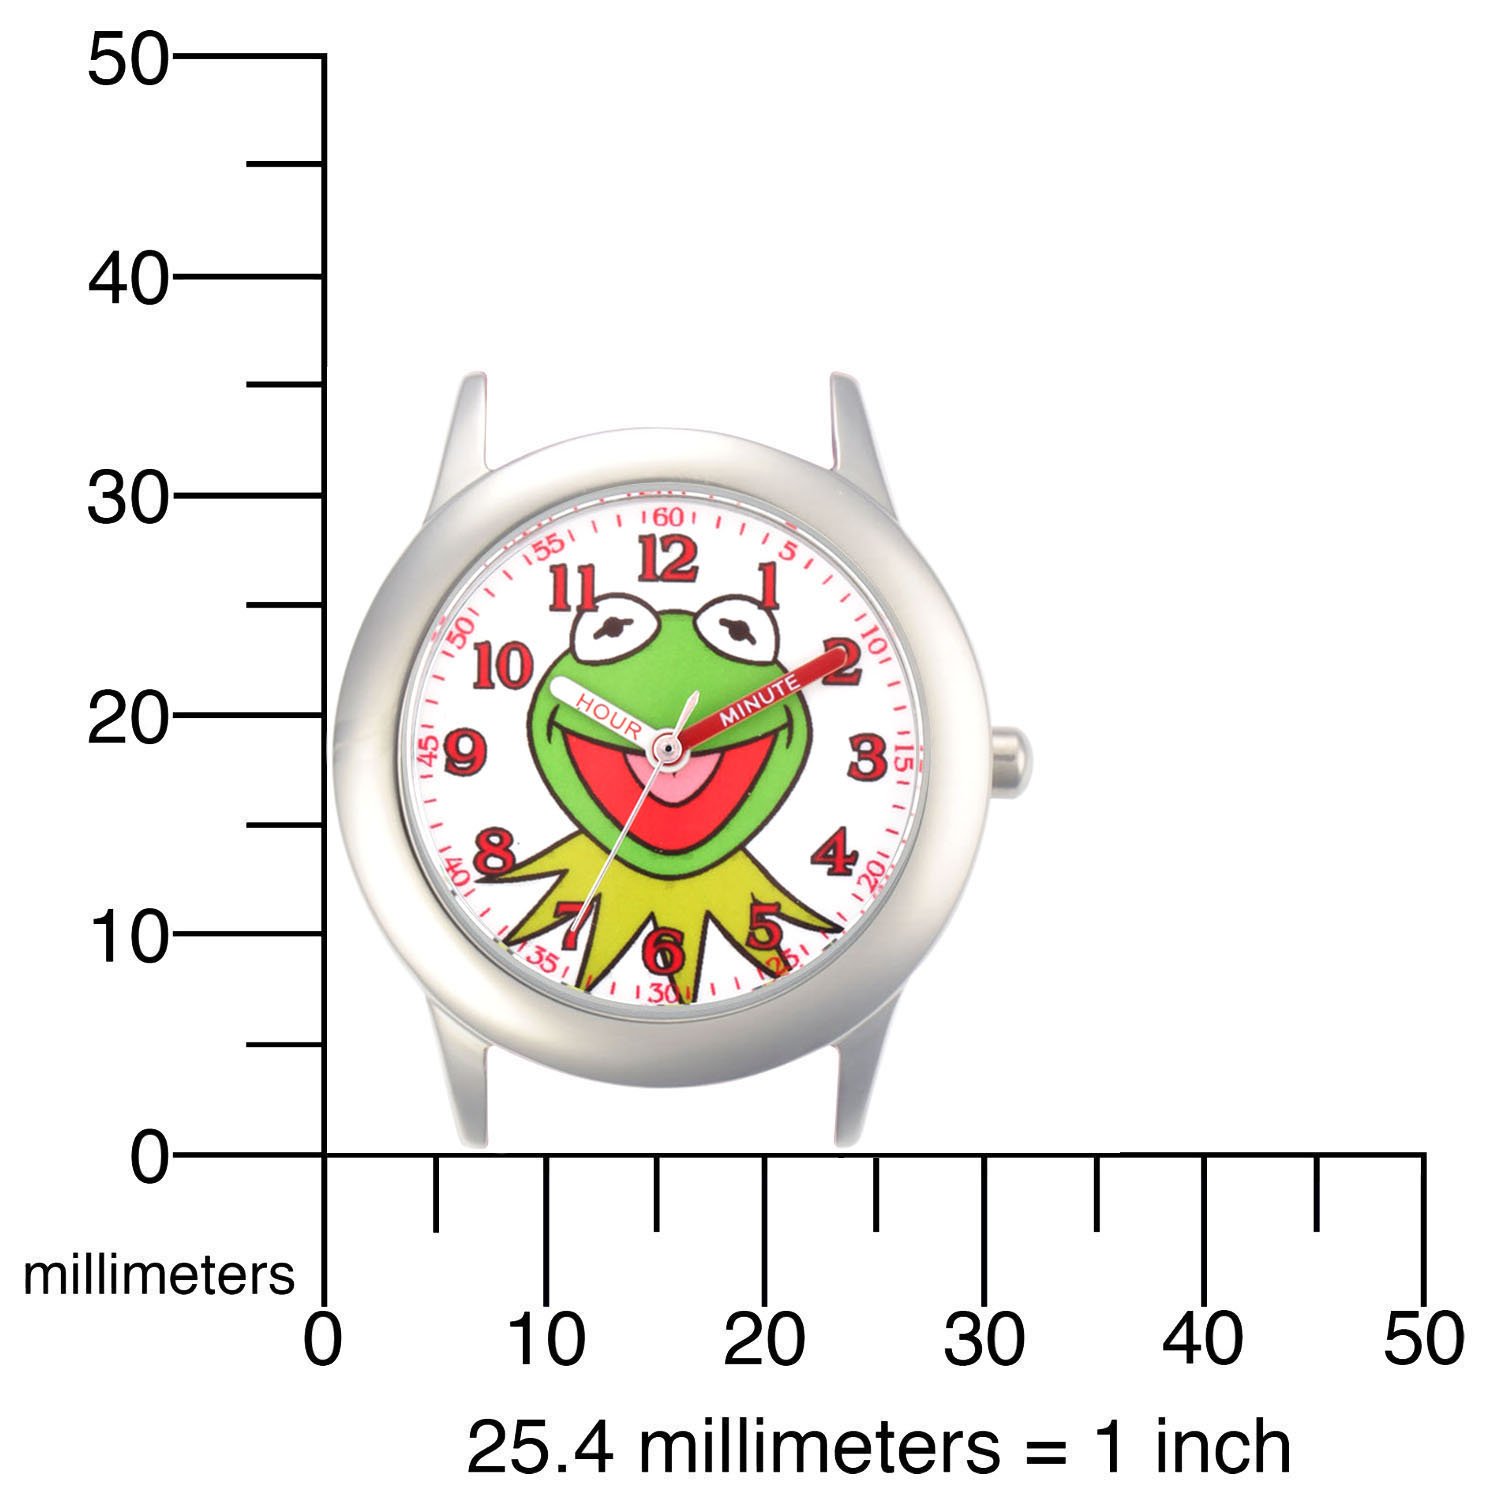 Disney Kids' W001623 The Muppets Kermit Stainless Steel Watch with Nylon Strap